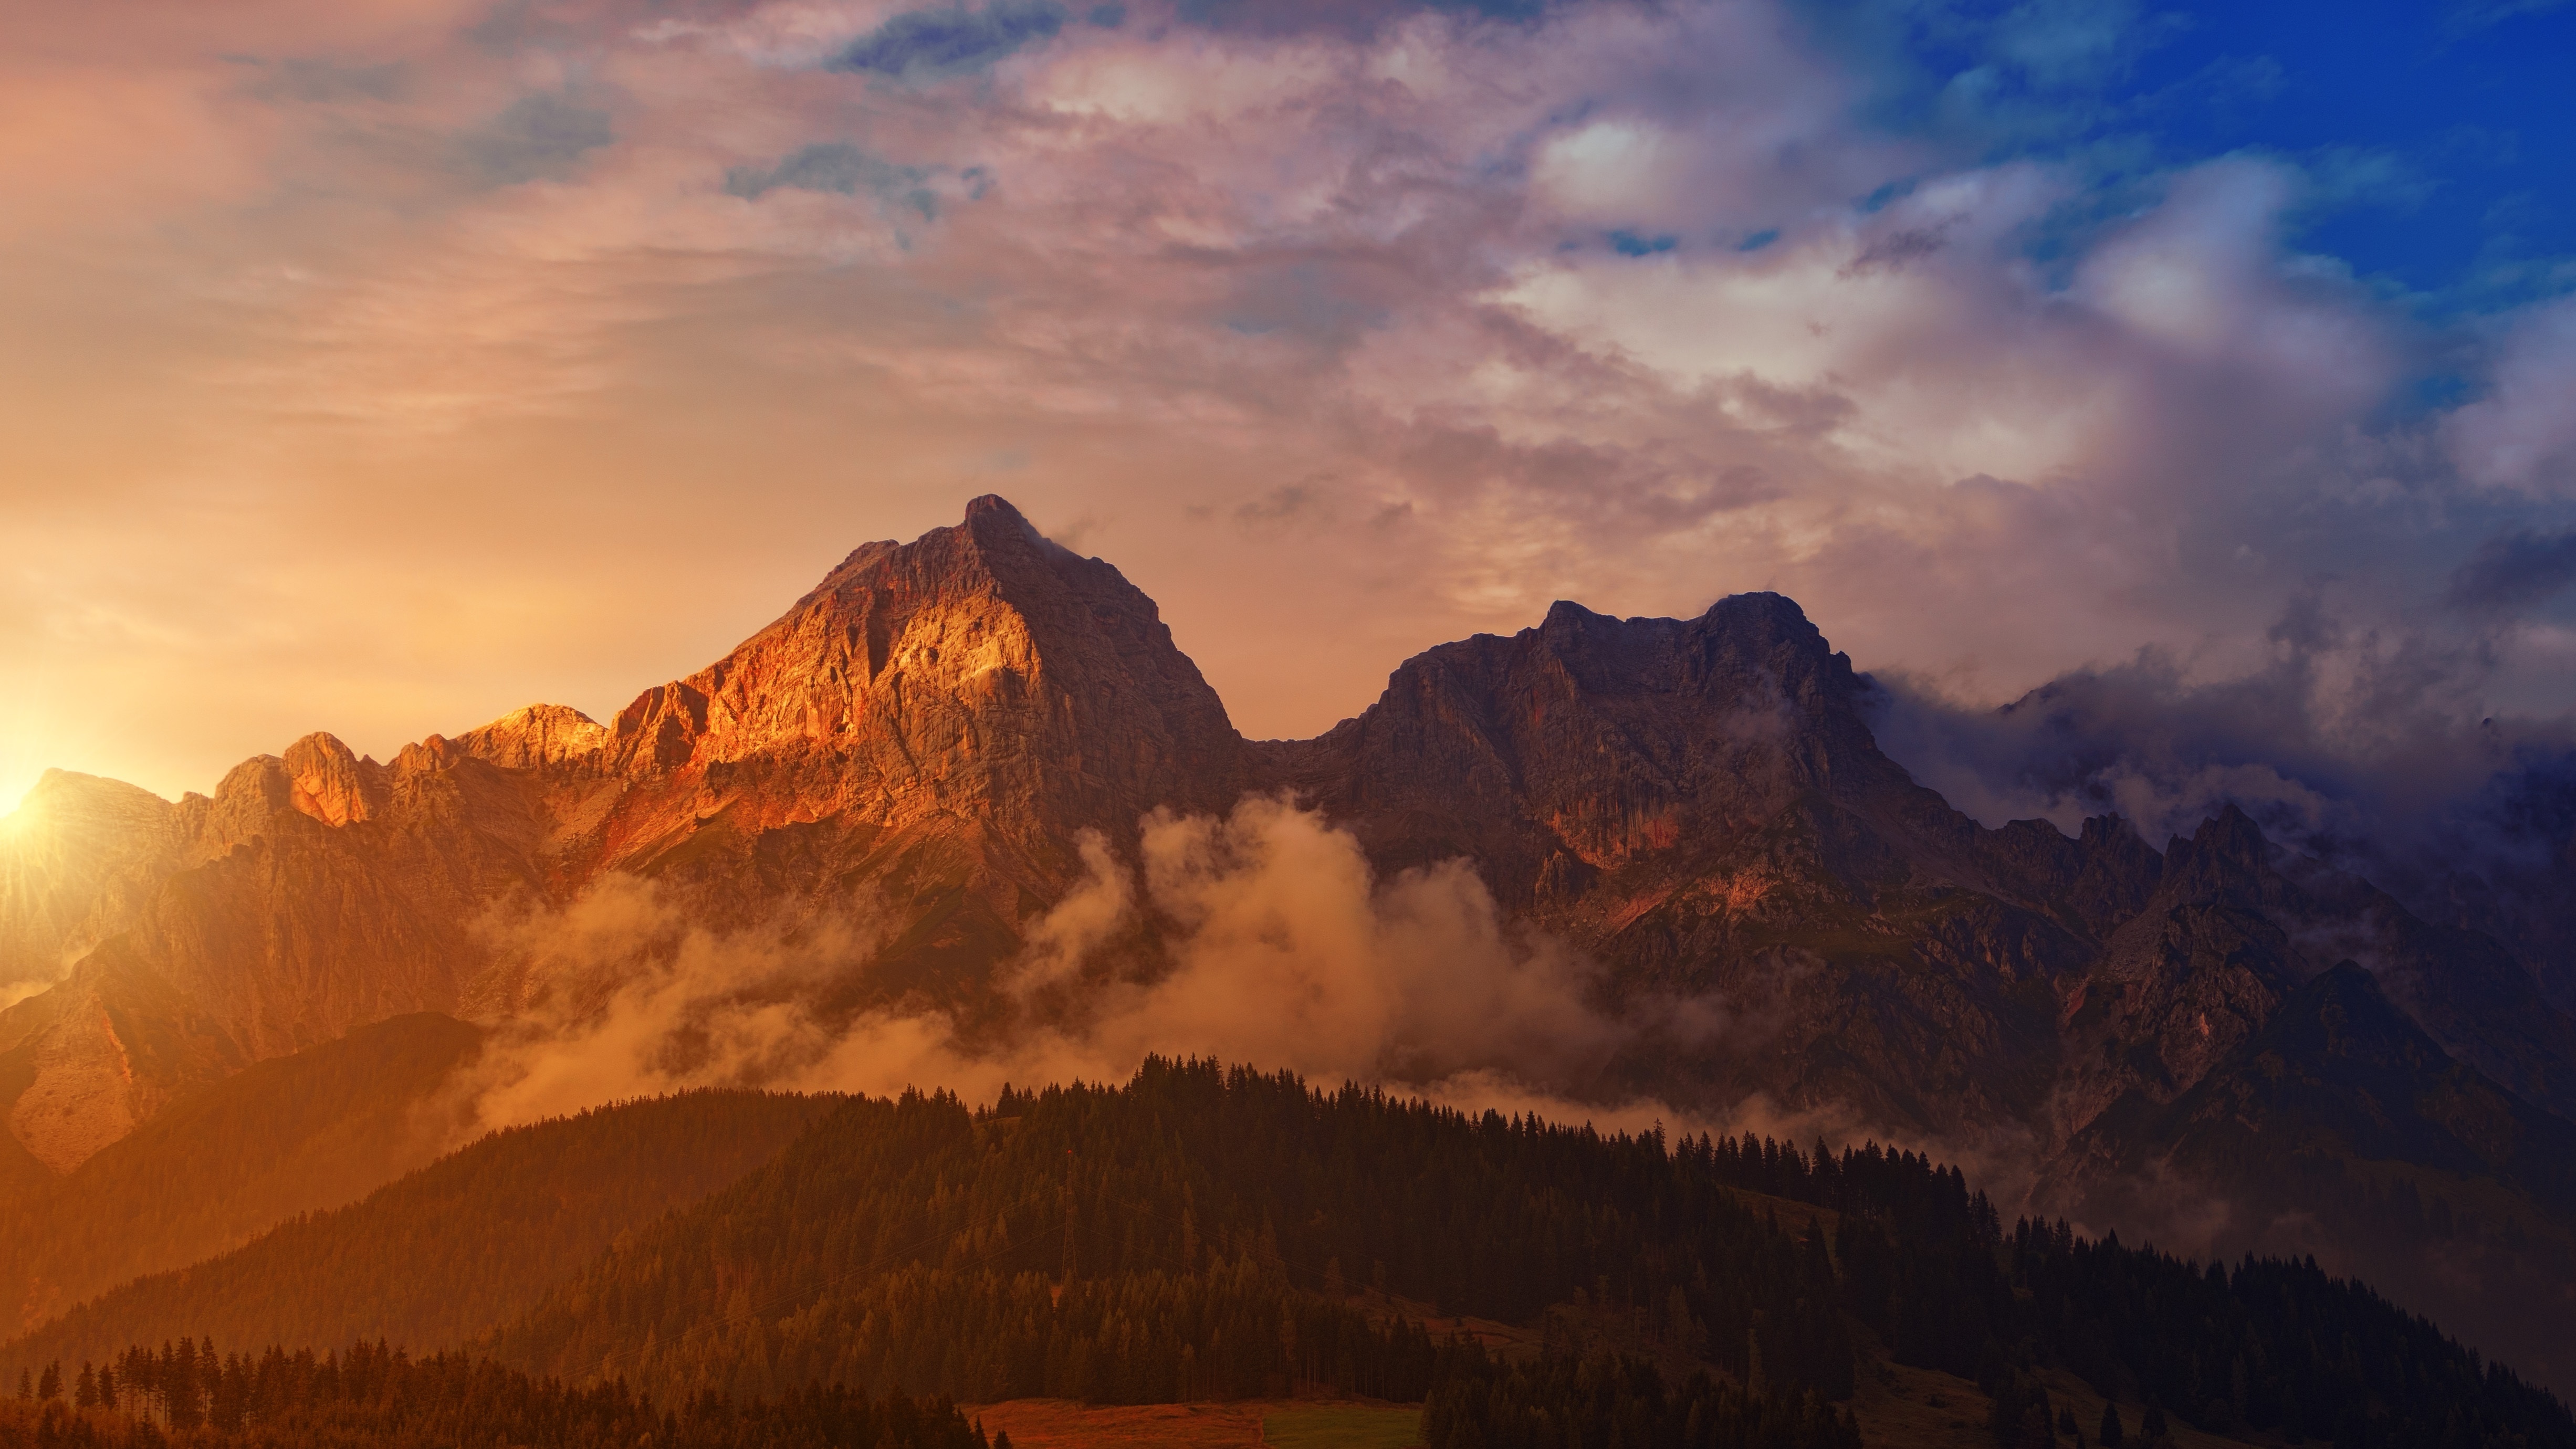 General 4906x2760 mountains nature landscape clouds sky sunset sunset glow mist trees sunlight